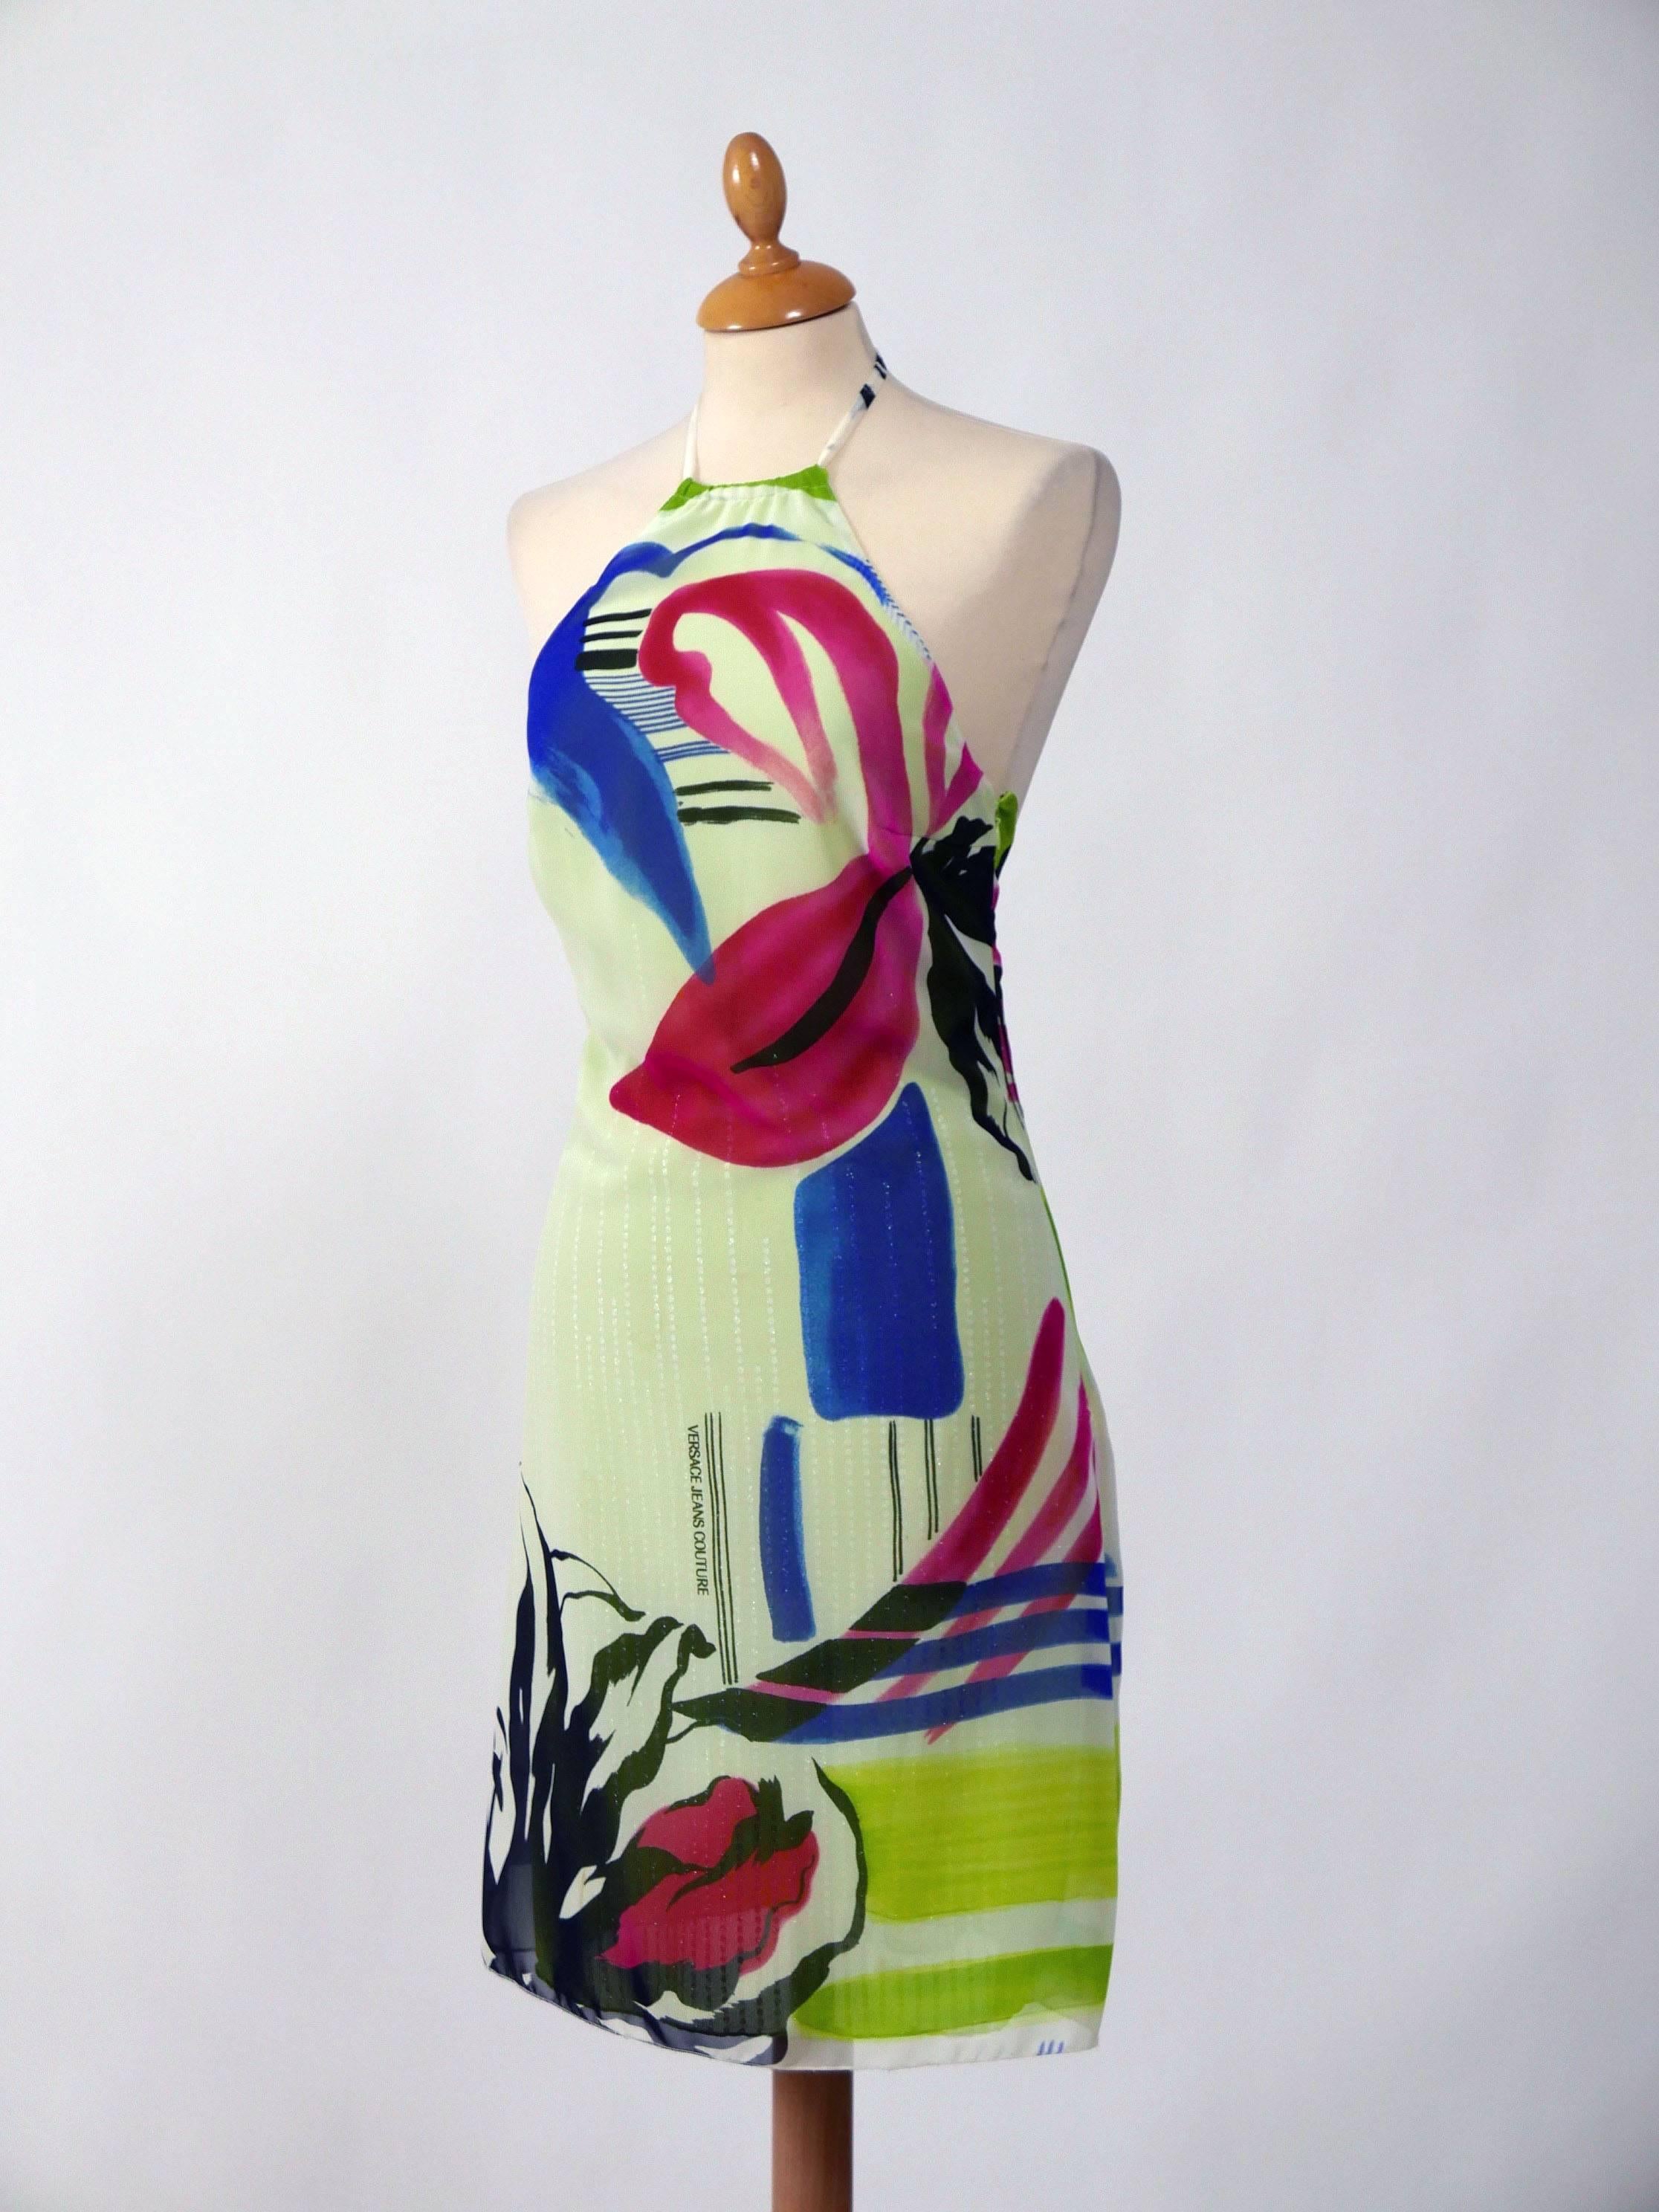 This gorgeous Versace dress is in white chiffon with floral pop art print and acid green under dress with sequins embroidered. It has side zip closure and neck straps. 

Very good vintage condition

Label: Versace Jeans Couture
Fabric: